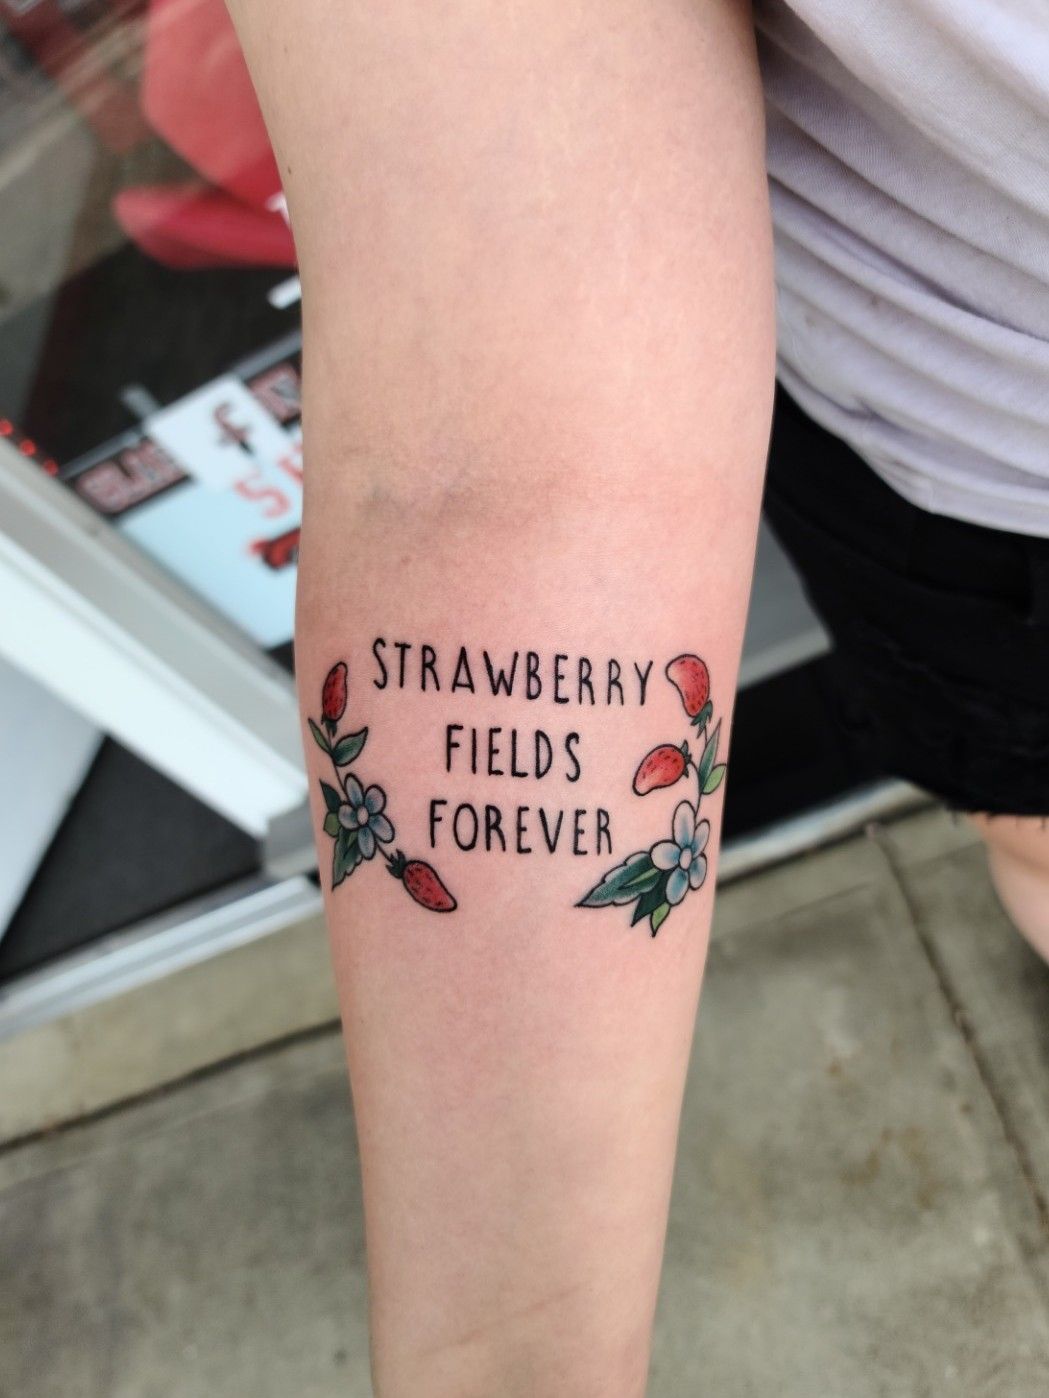 Strawberry Fields lettering tattoo in red ink